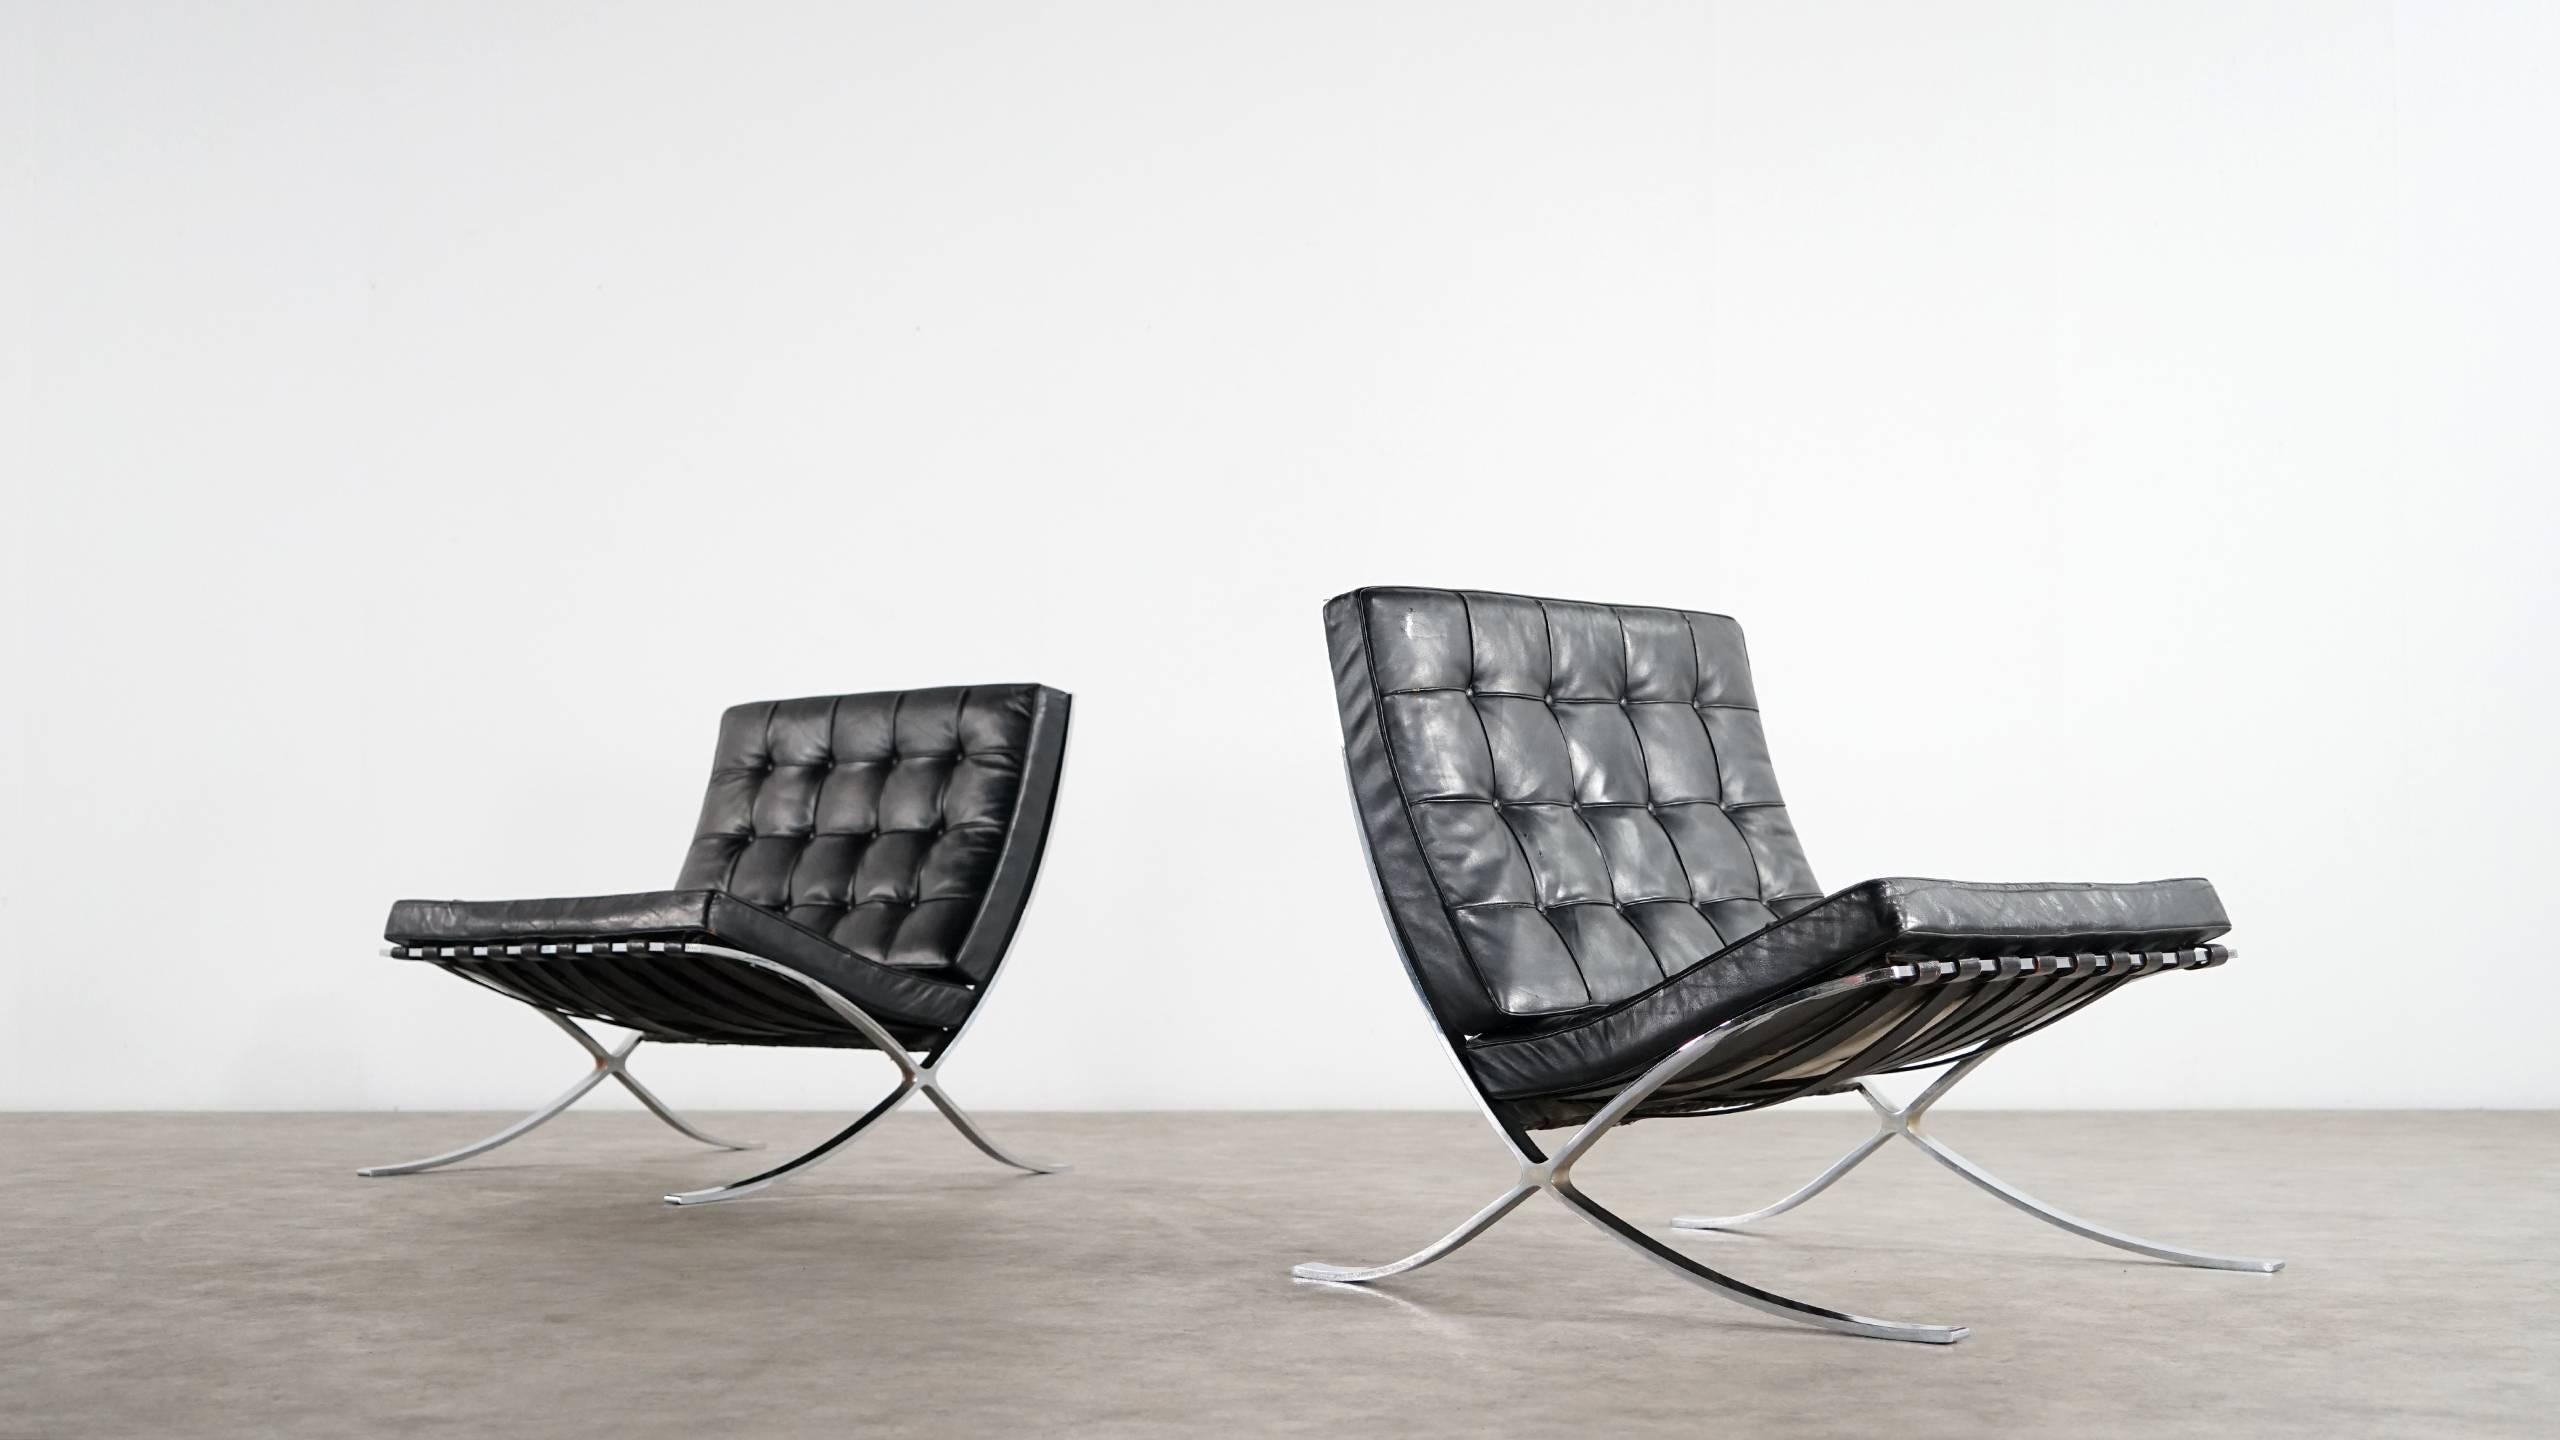 2x Ludwig Mies van der Rohe Barcelona chairs by Knoll International
for the Barcelona-Pavillon in 1929.

This pair was bought in 1955 for the Nordwestlotto Lobby in Münster, Germany. it closed in 1957 and since the chairs were stored.

Coming